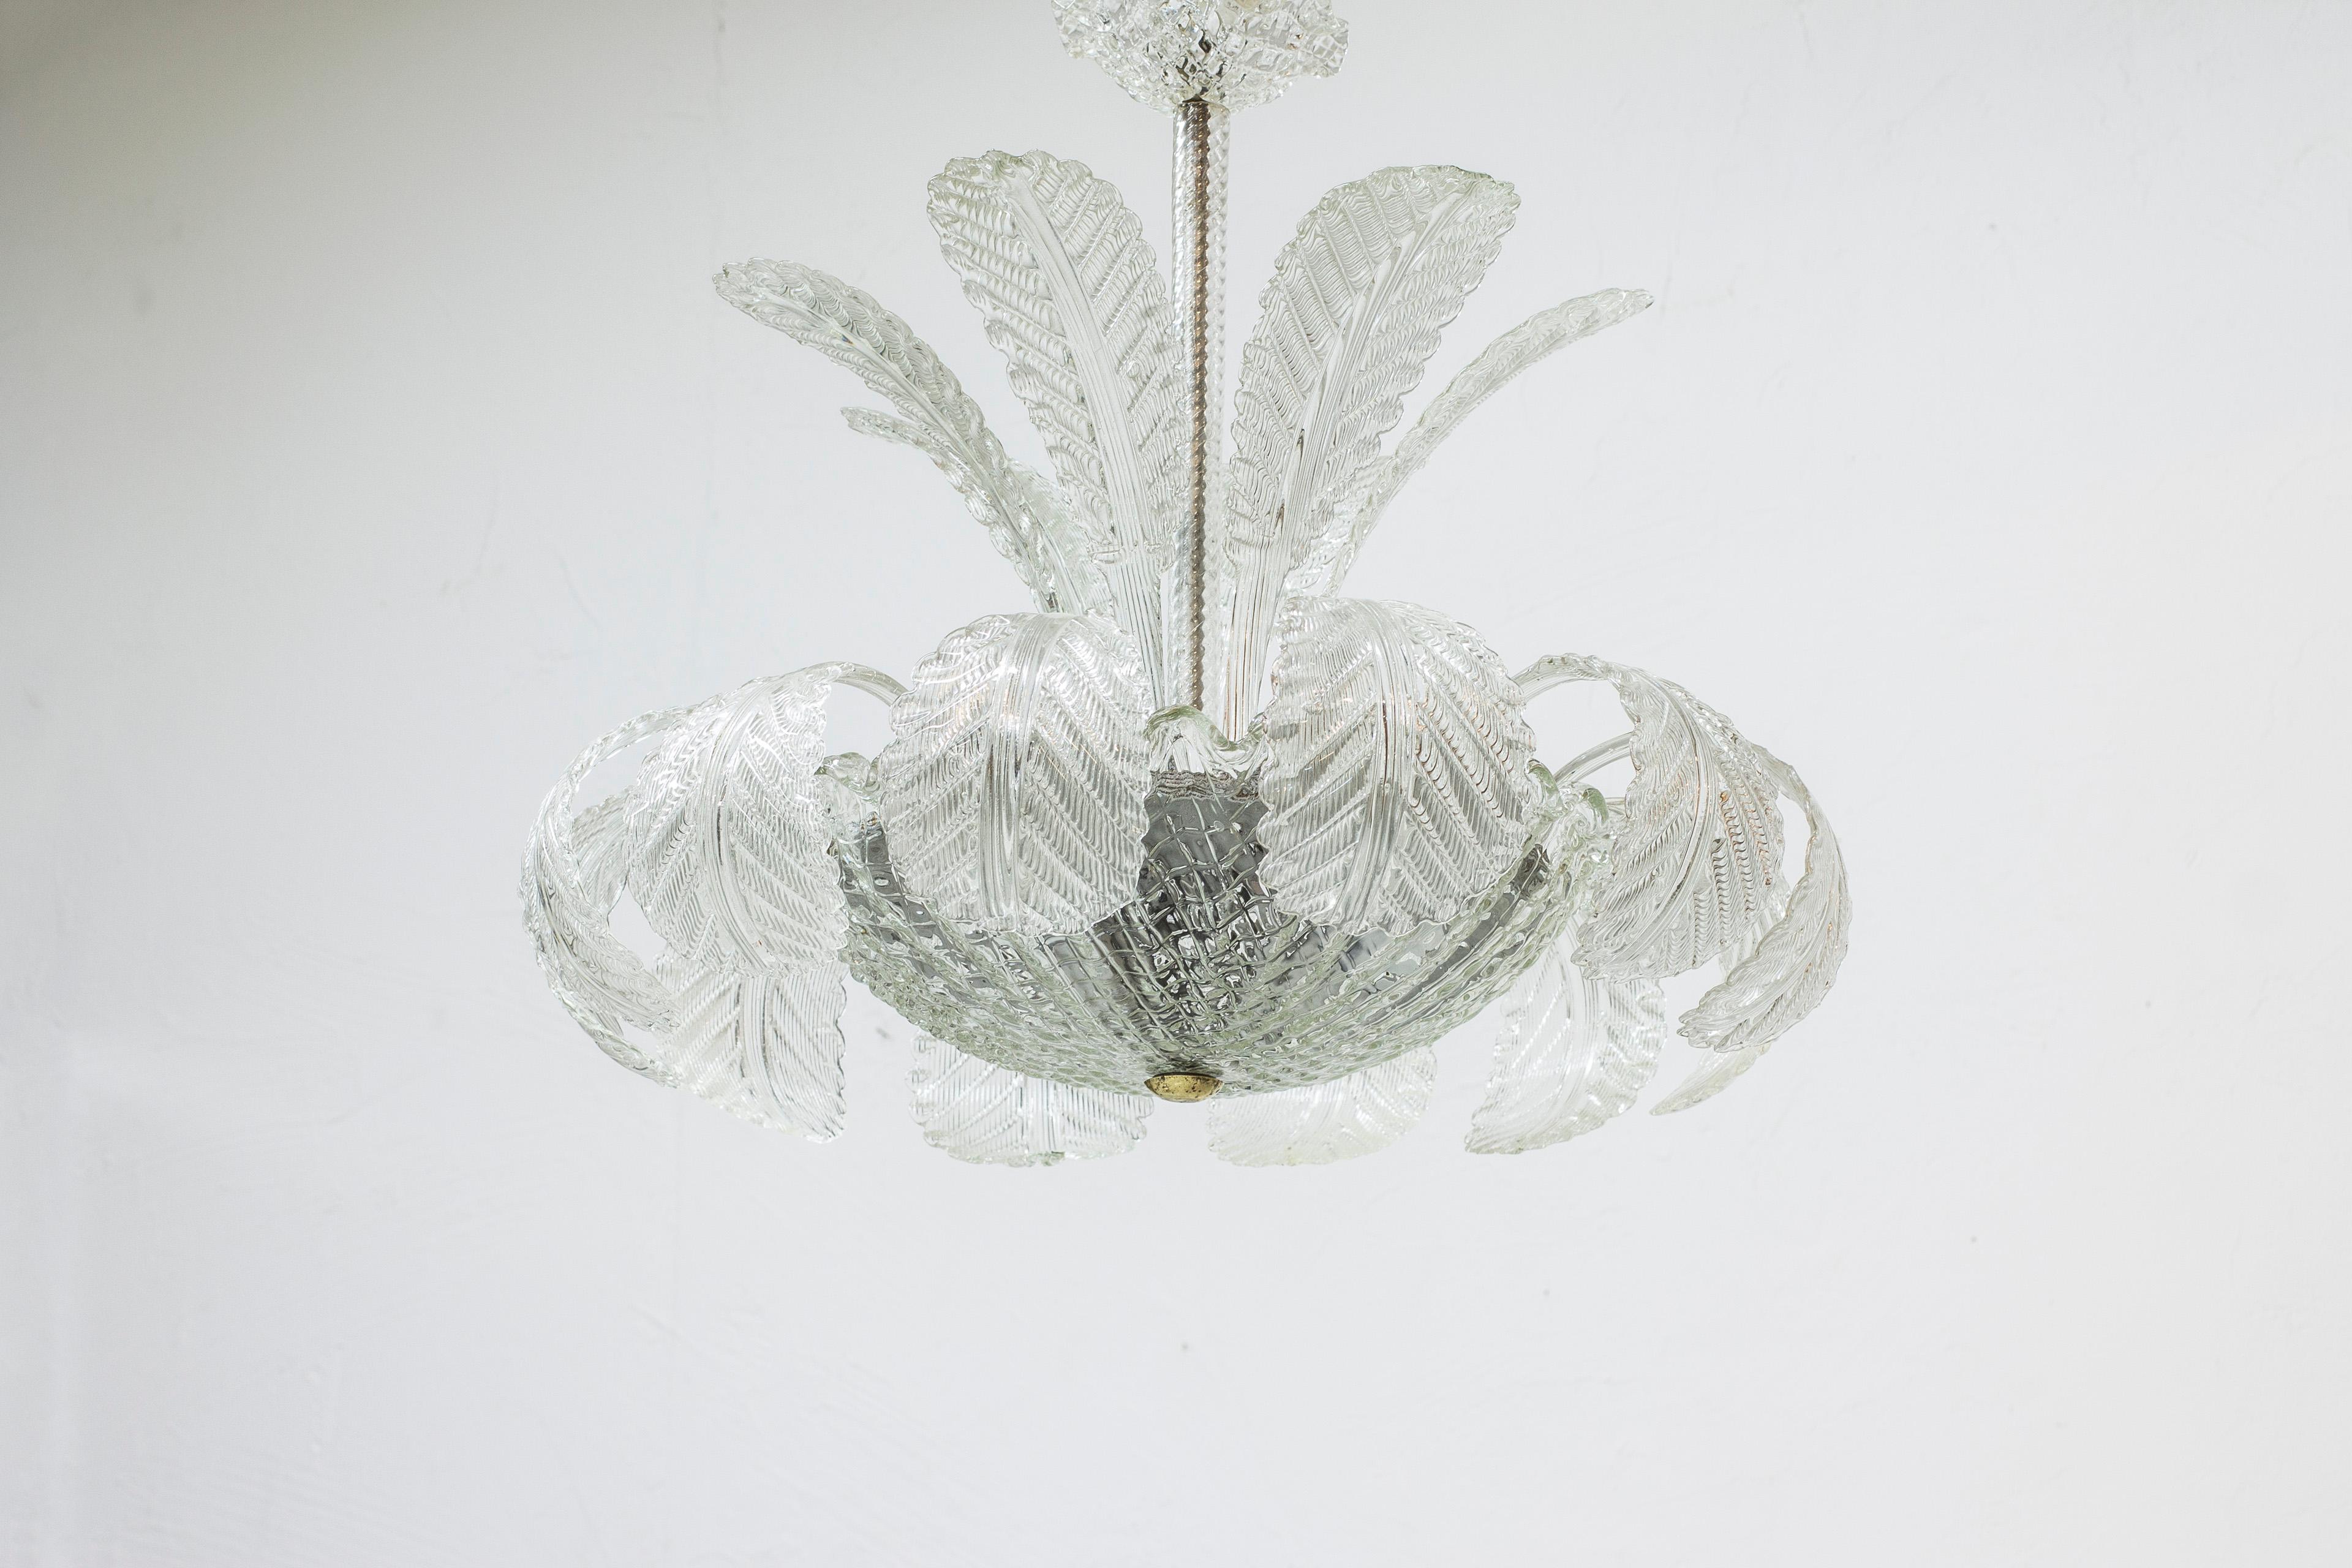 Chandelier designed by Fritz Kurz. Produced by Orrefors in Sweden in the 1940s. Made from cast blown clear glass. Venetian style with sixteen leaves, glass bowl and ceiling mount in glass. Very good vintage condition with few signs of age related